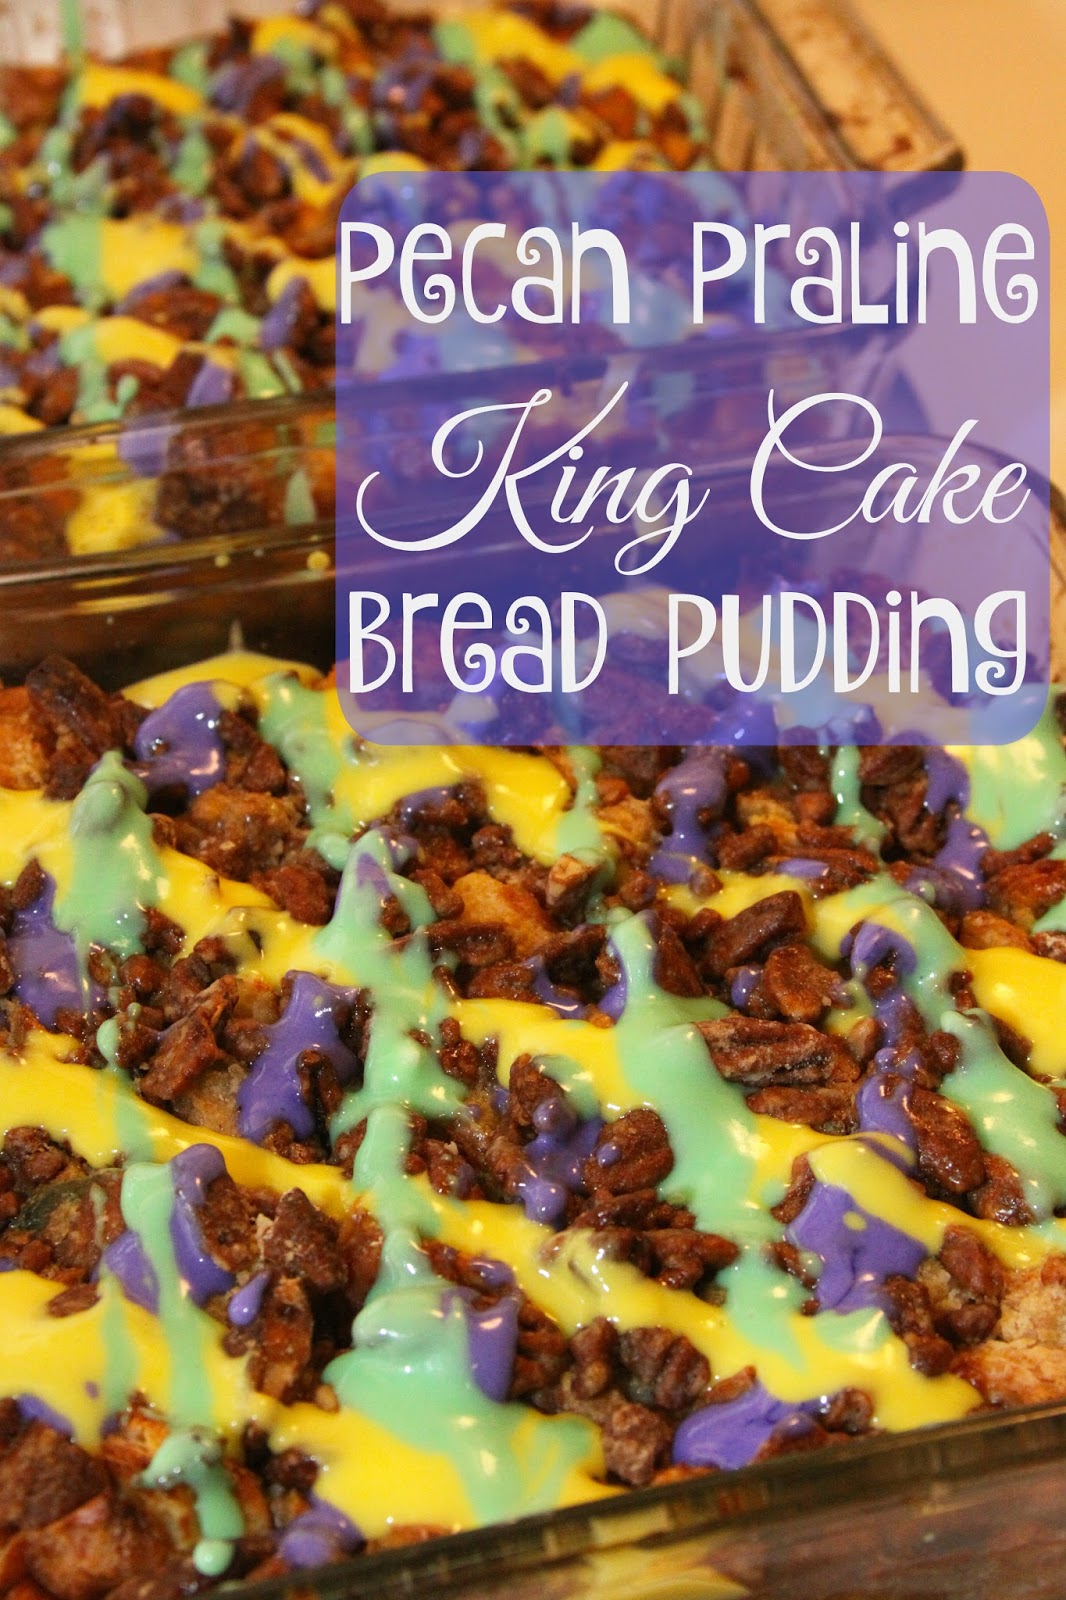 For the Love of Food: Pecan Praline King Cake Bread Pudding